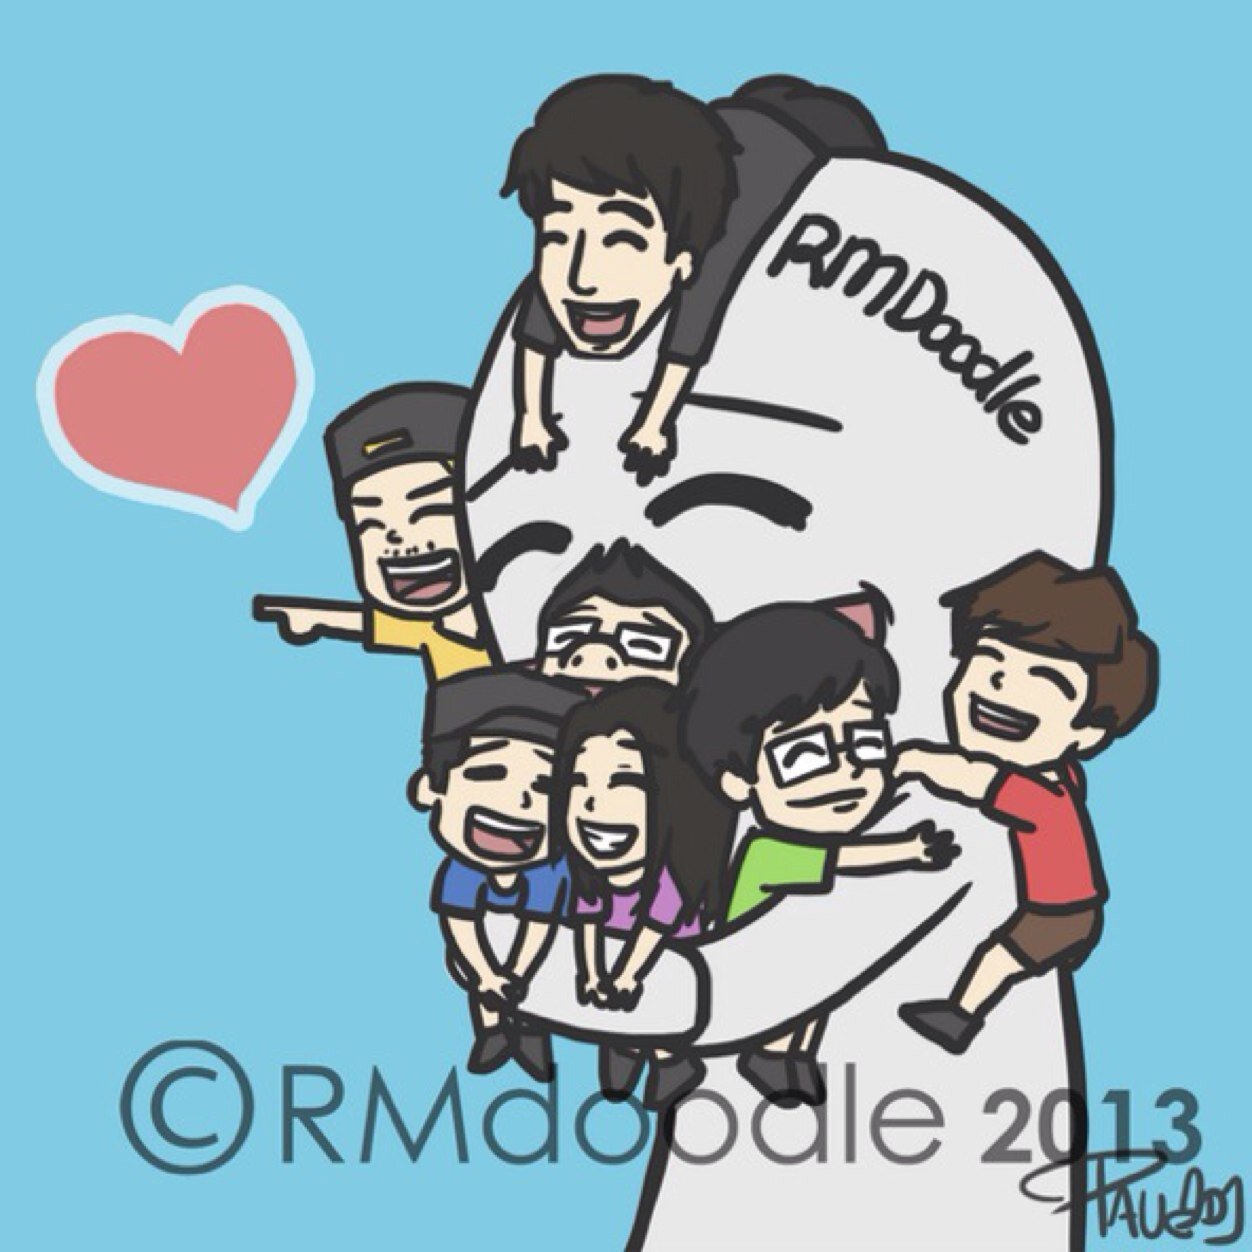 We are RM shipper! Running Man fanbase! follow us to know more about Running Man ;)